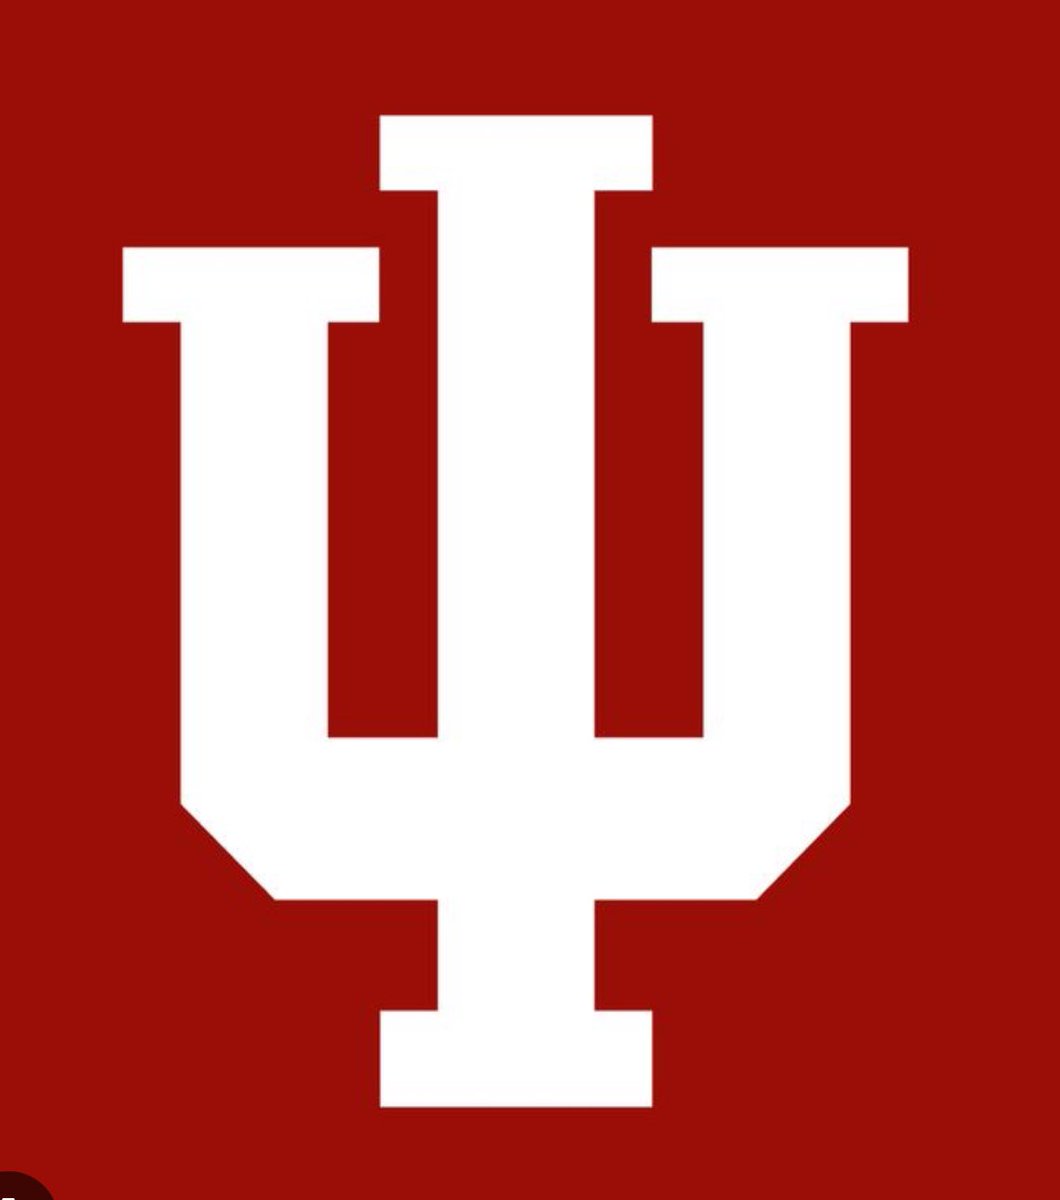 Wow! After a great workout and conversation w @CoachTSunseri and @CCignettiIU, I am blessed to receive an offer tonight from Indiana University! @IndianaFootball @BuckFitz